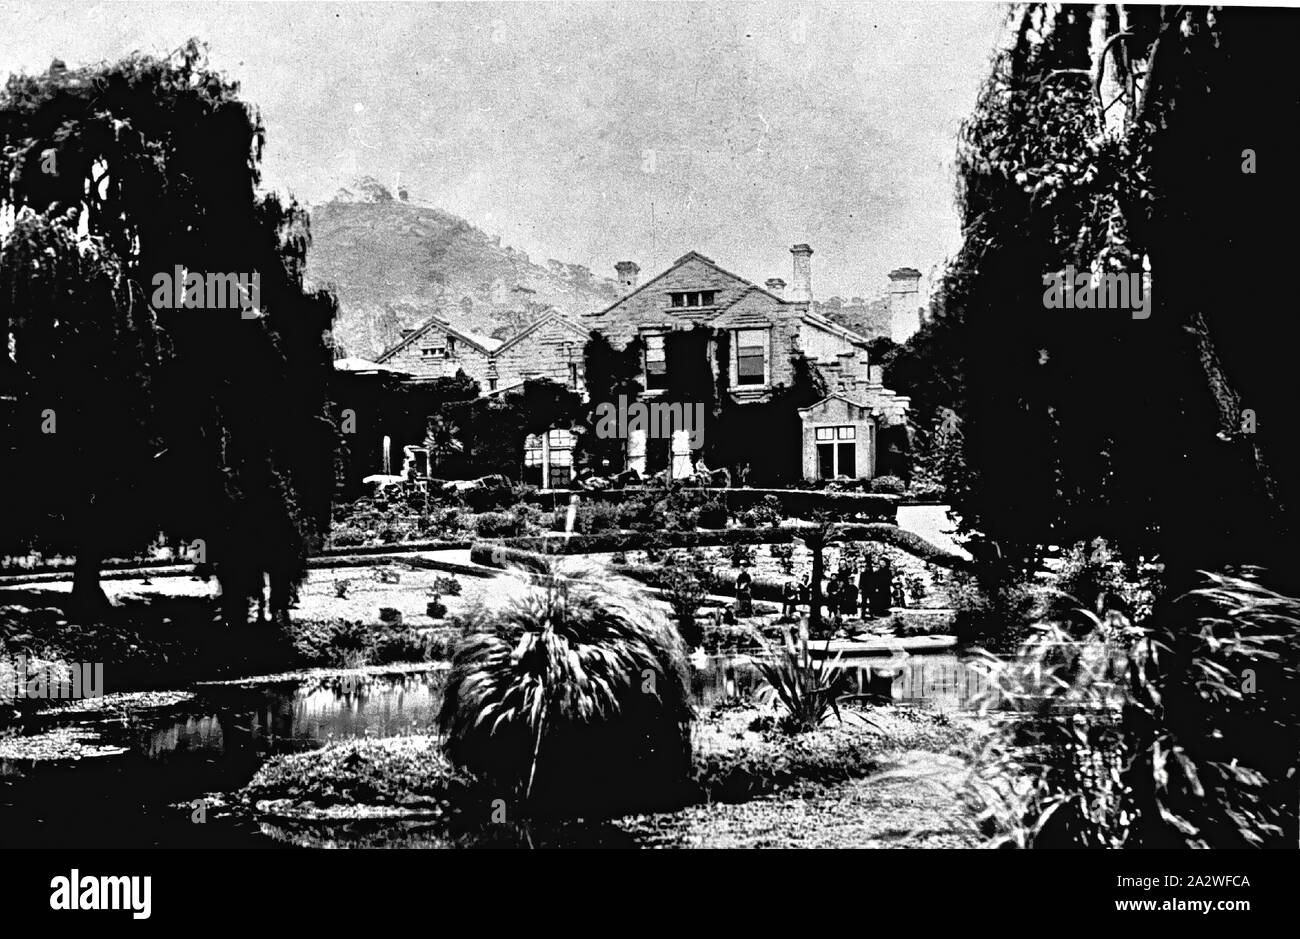 Negative - 'Ercildoune' Homestead, Ballarat, Victoria, 1879, 'Ercildoune' homestead. This illustration was published in 'Salmon at the Antipode.'. A small lake is located in front of the homestead, which is surrounded by large trees and bushes. There is a garden with small plants directly in front of the homestead, and there are plants growing on the building. The homestead has two chimneys and several large windows Stock Photo